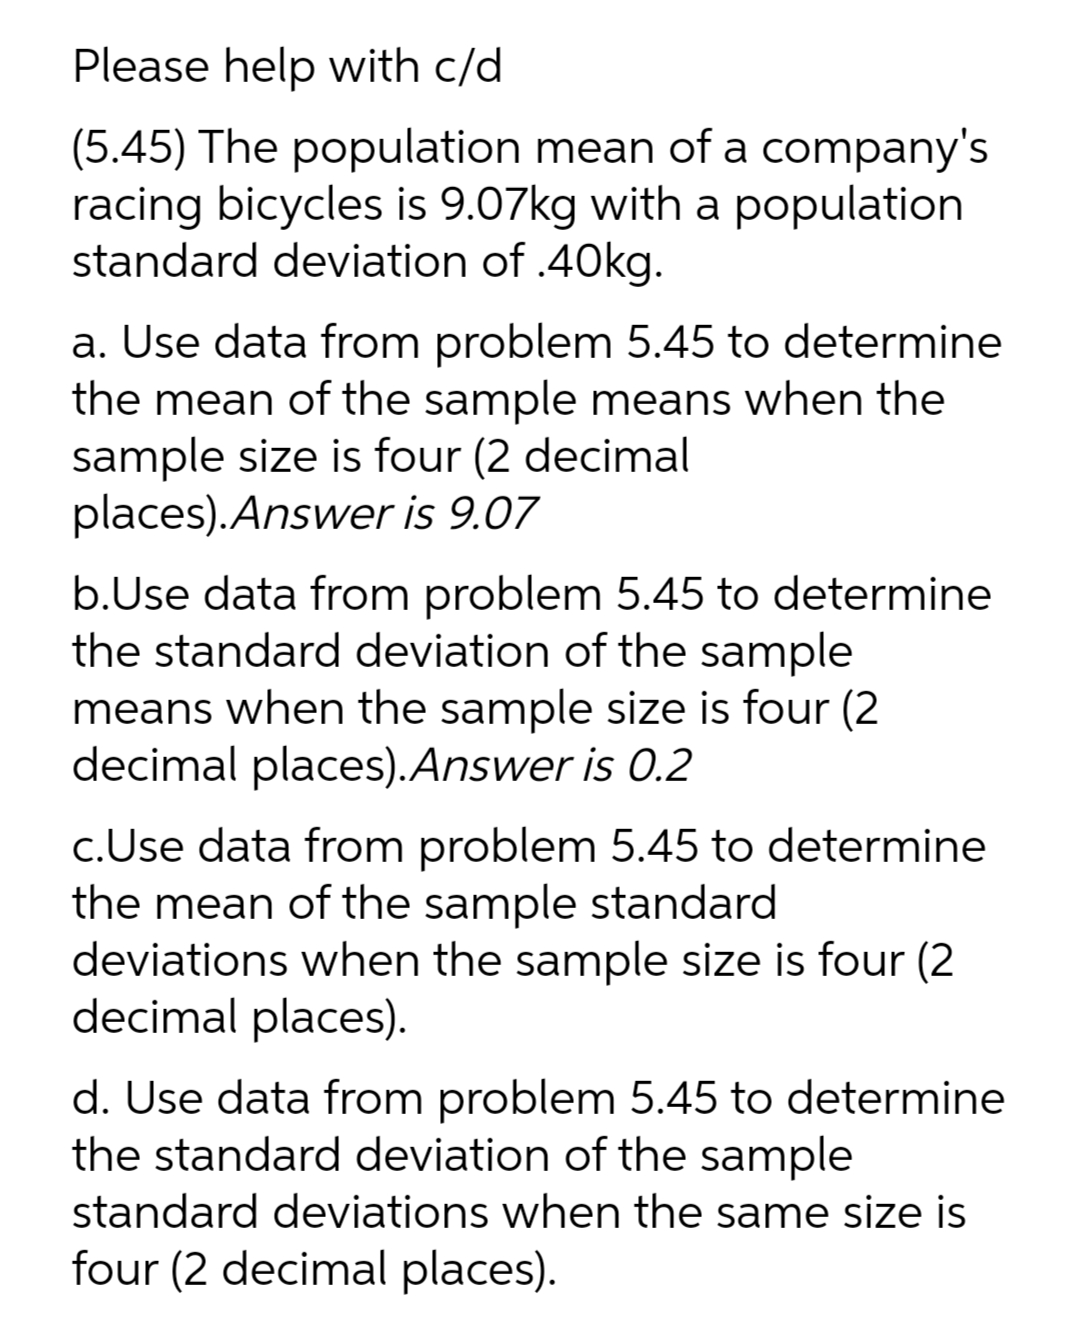 Please help with c/d
(5.45) The population mean of a company's
racing bicycles is 9.07kg with a population
standard deviation of .40kg.
a. Use data from problem 5.45 to determine
the mean of the sample means when the
sample size is four (2 decimal
places).Answer is 9.07
b.Use data from problem 5.45 to determine
the standard deviation of the sample
means when the sample size is four (2
decimal places).Answer is 0.2
c.Use data from problem 5.45 to determine
the mean of the sample standard
deviations when the sample size is four (2
decimal places).
d. Use data from problem 5.45 to determine
the standard deviation of the sample
standard deviations when the same size is
four (2 decimal places).
